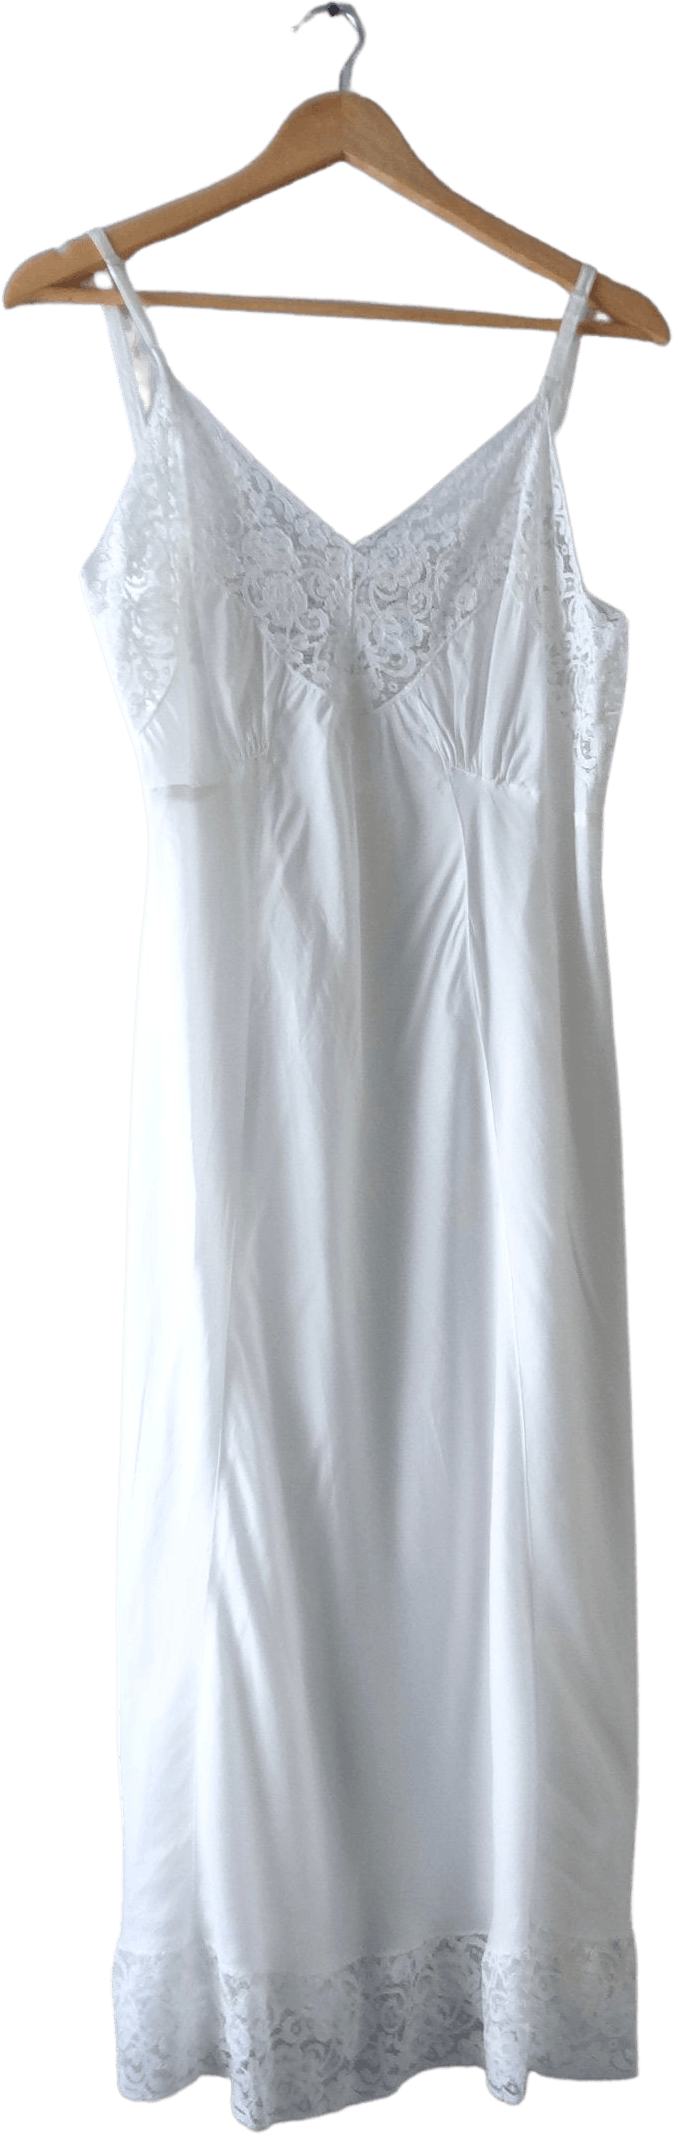 Vintage 50's/60's Soft White Rayon Slip Dress by Phil-Maid | Shop THRILLING